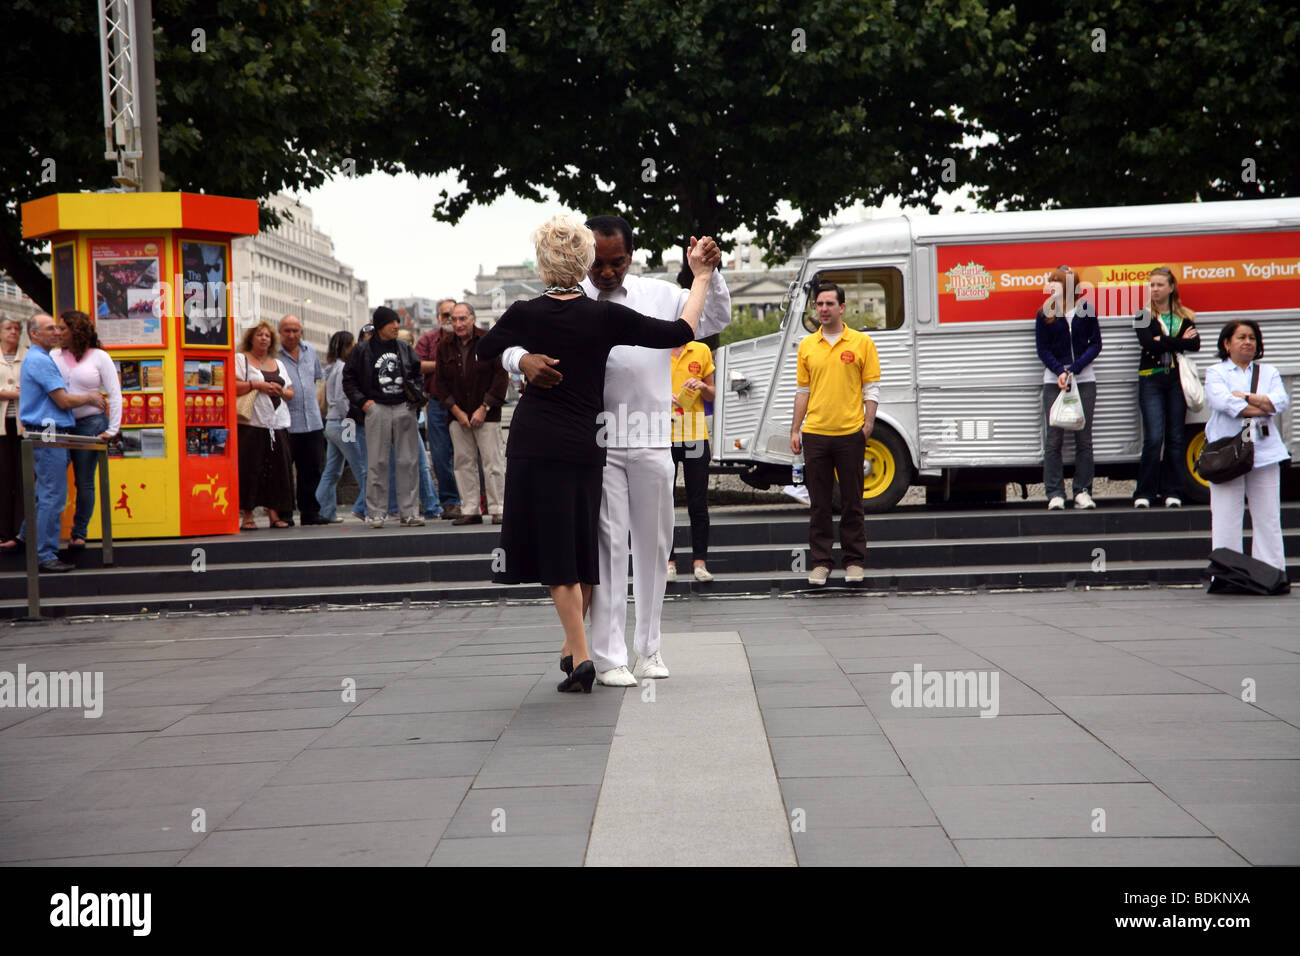 Glamorous mixed race elderly couple dancing in the foyer at The Royal Festival hall South Bank London Stock Photo